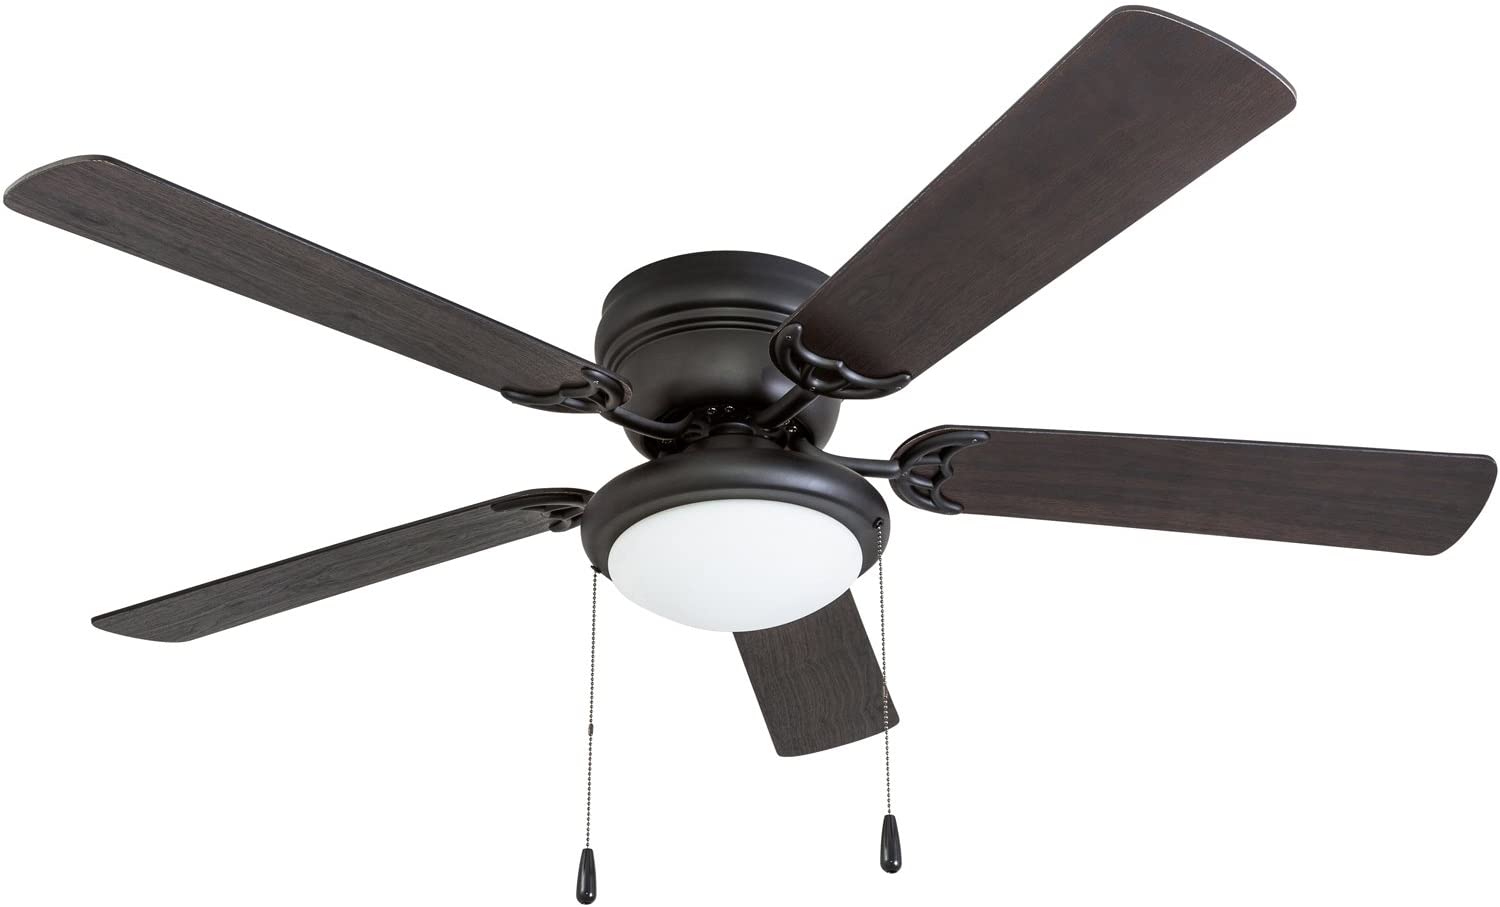 Portage Bay 50251 Hugger 52-Inches Kitchen Ceiling Fan